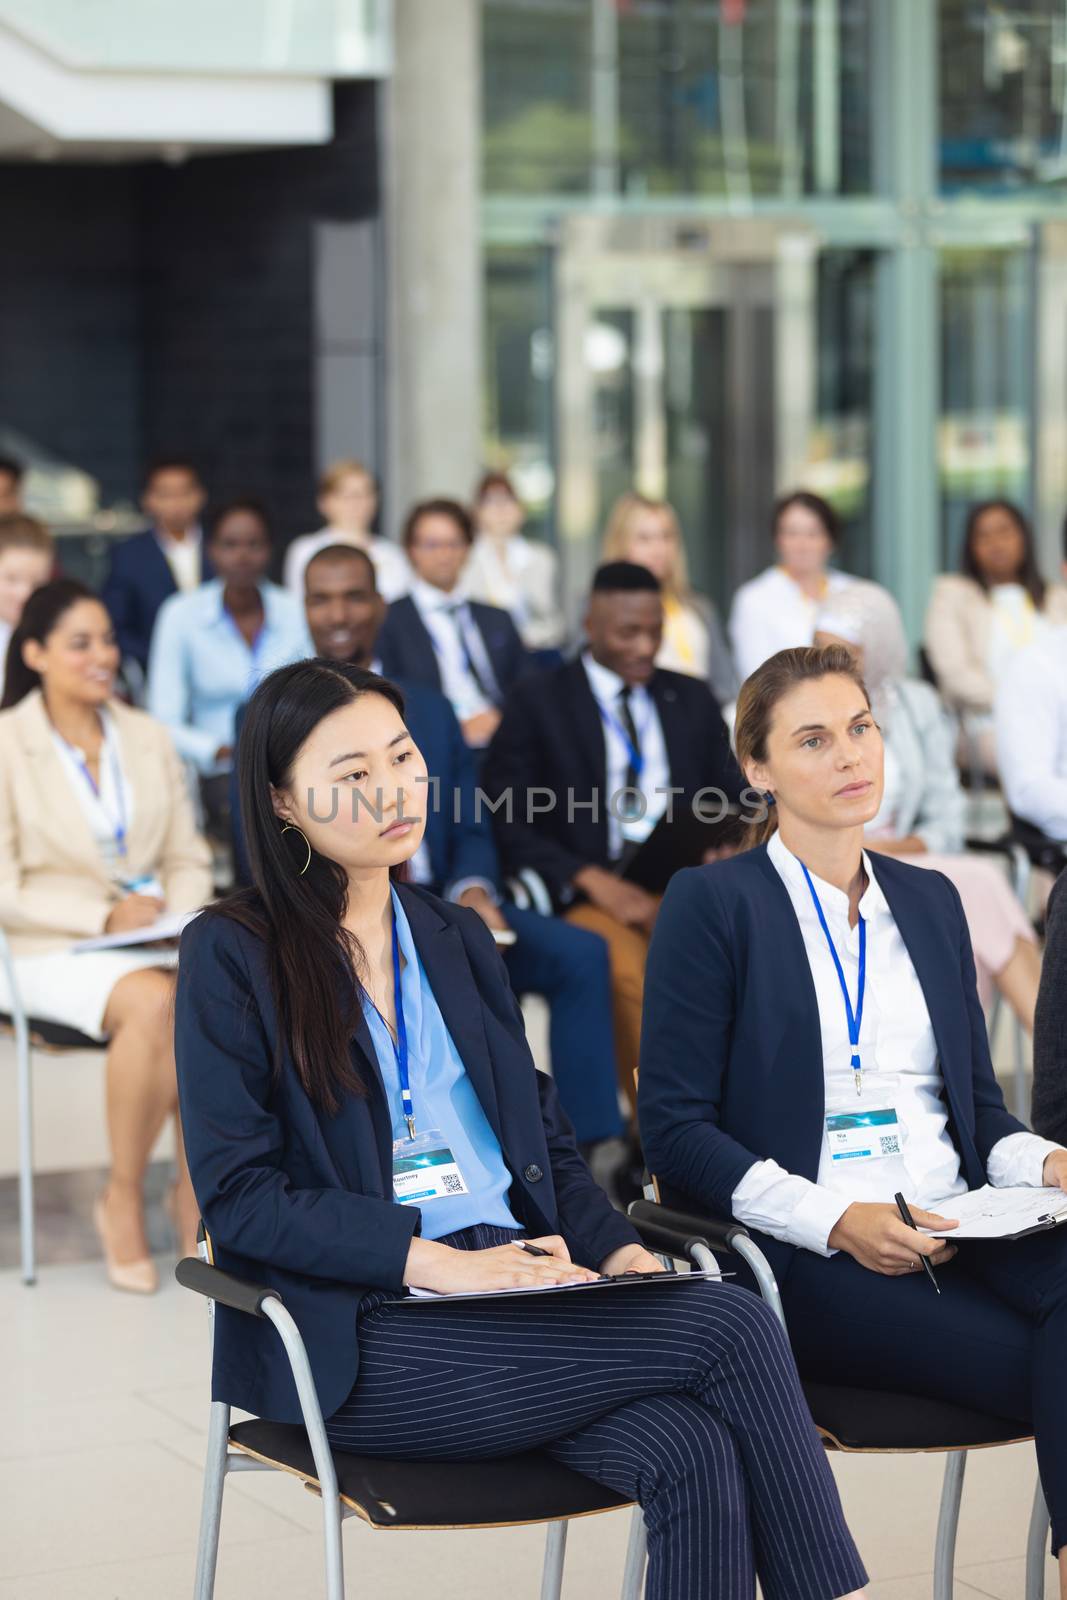 Front view of diverse business people sitting on chairs while listening to speech in conference room